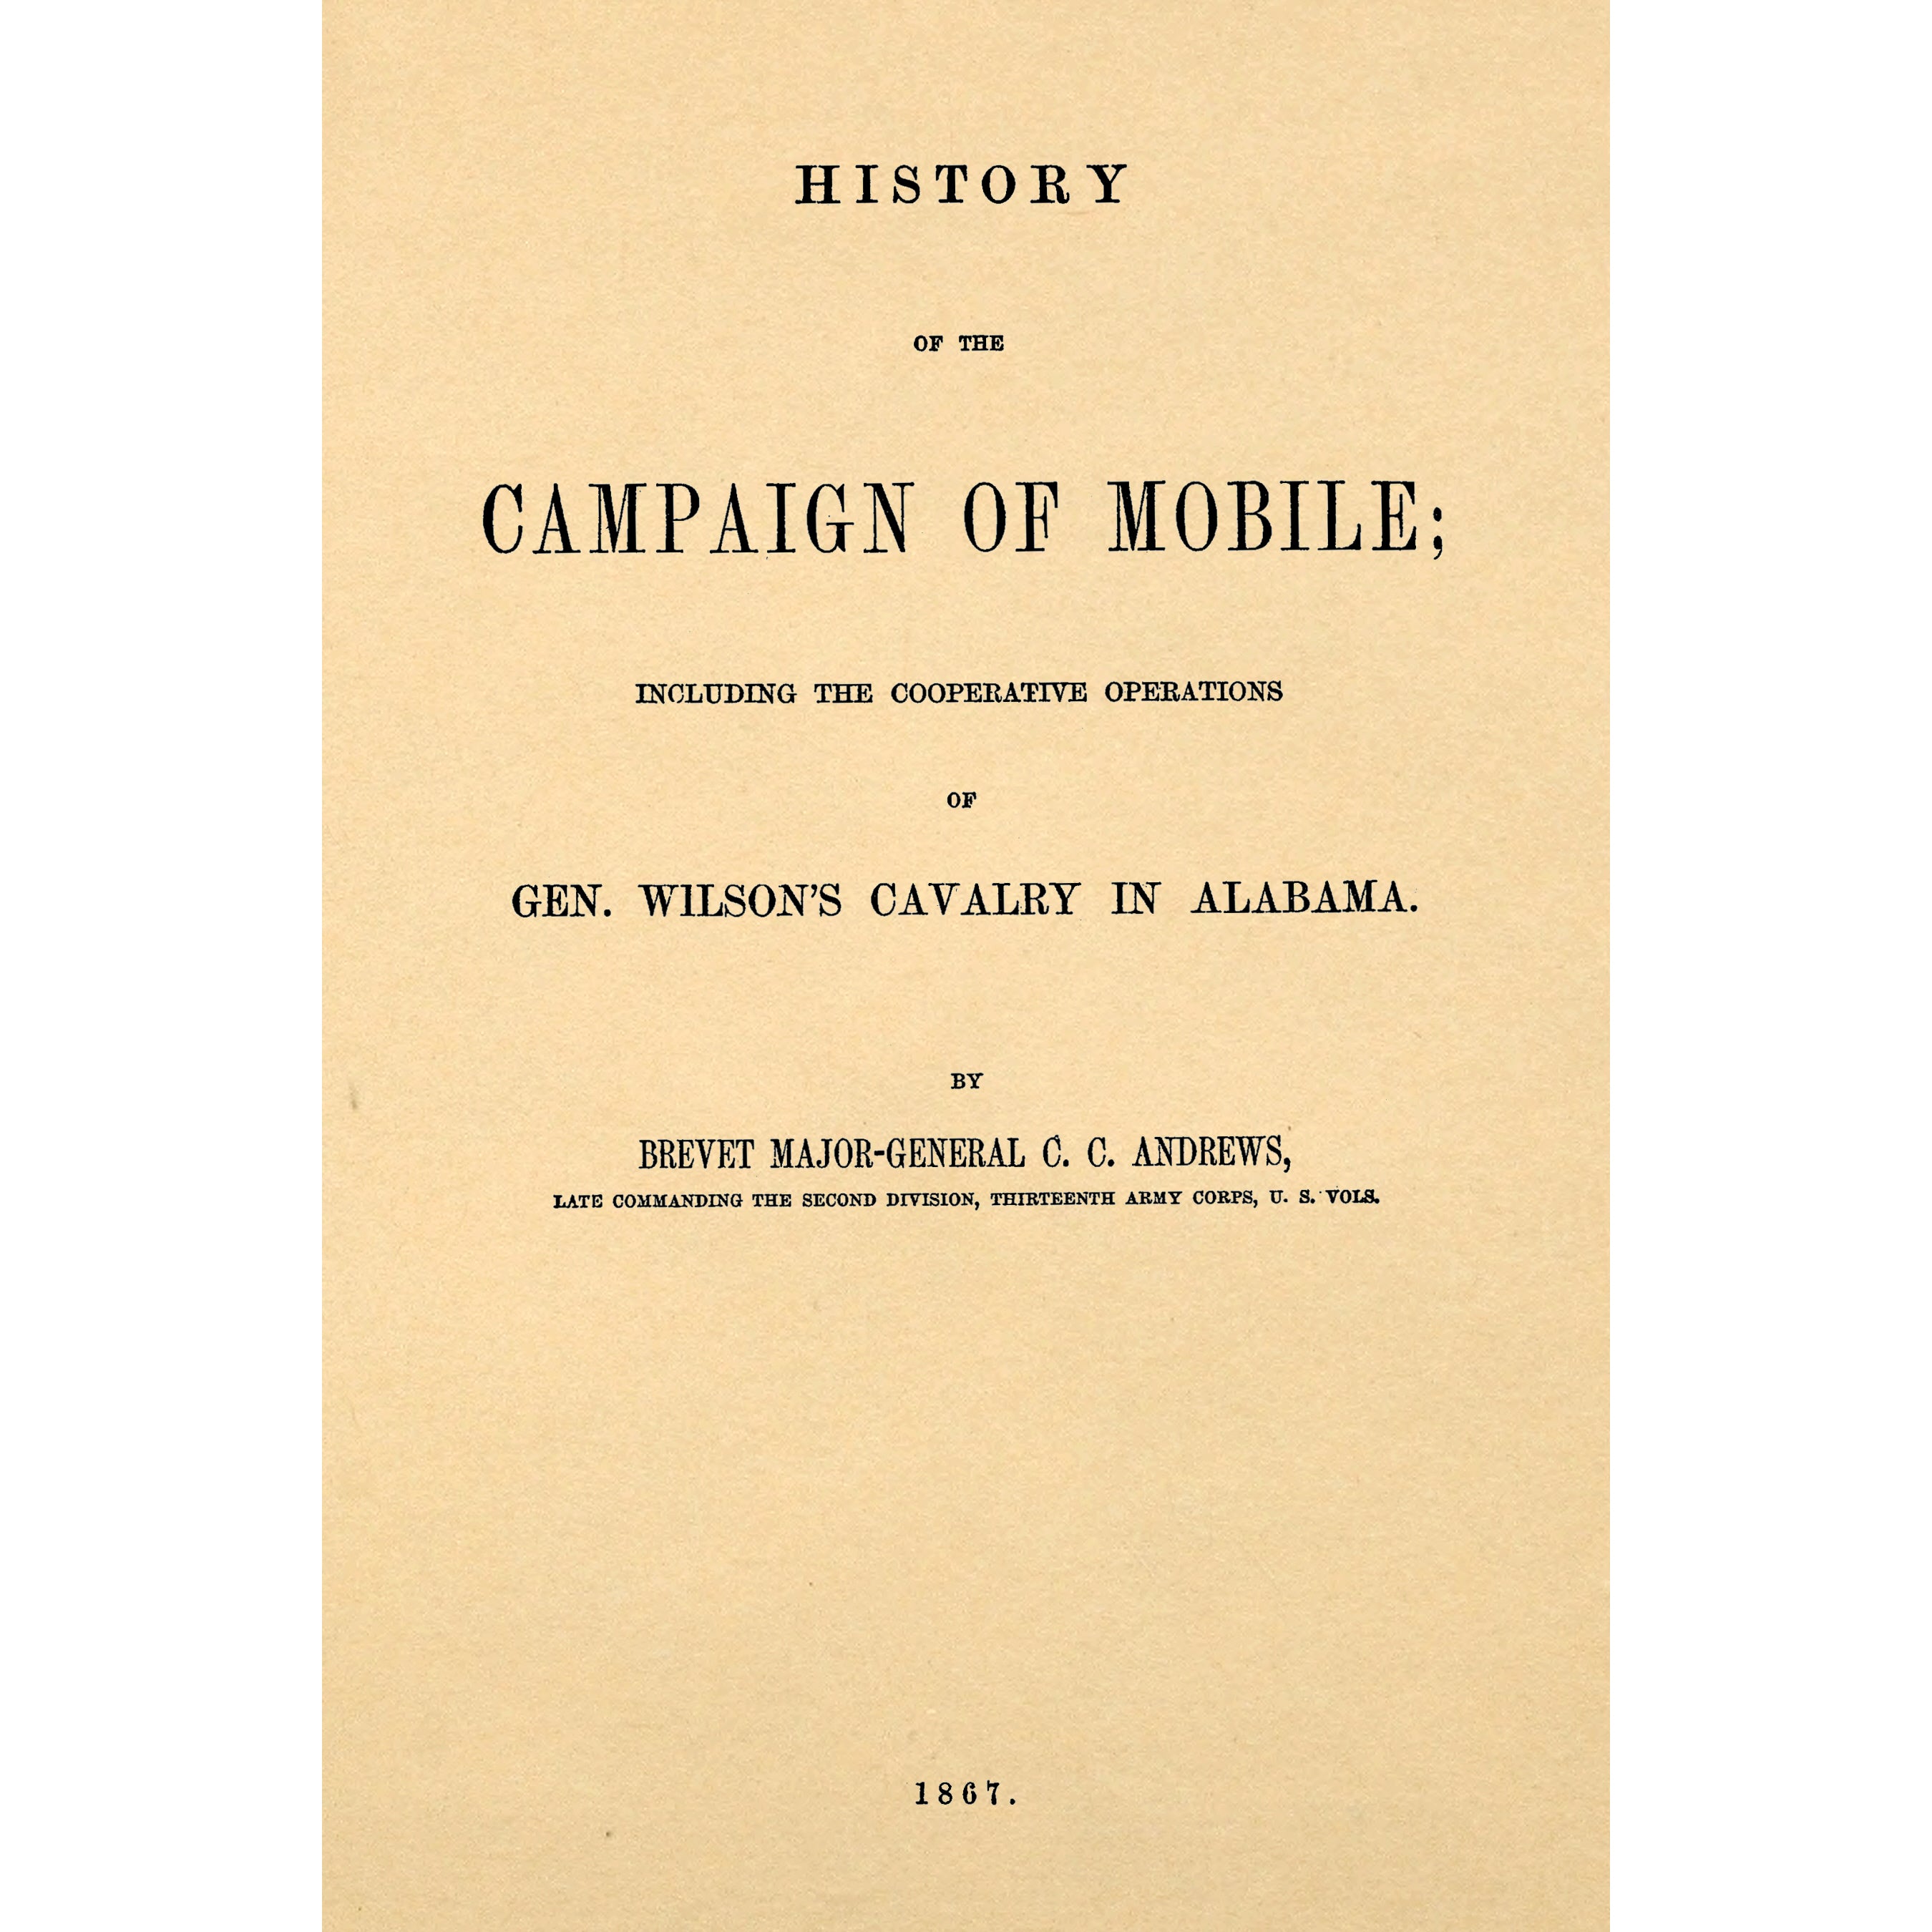 History of the campaign of Mobile.